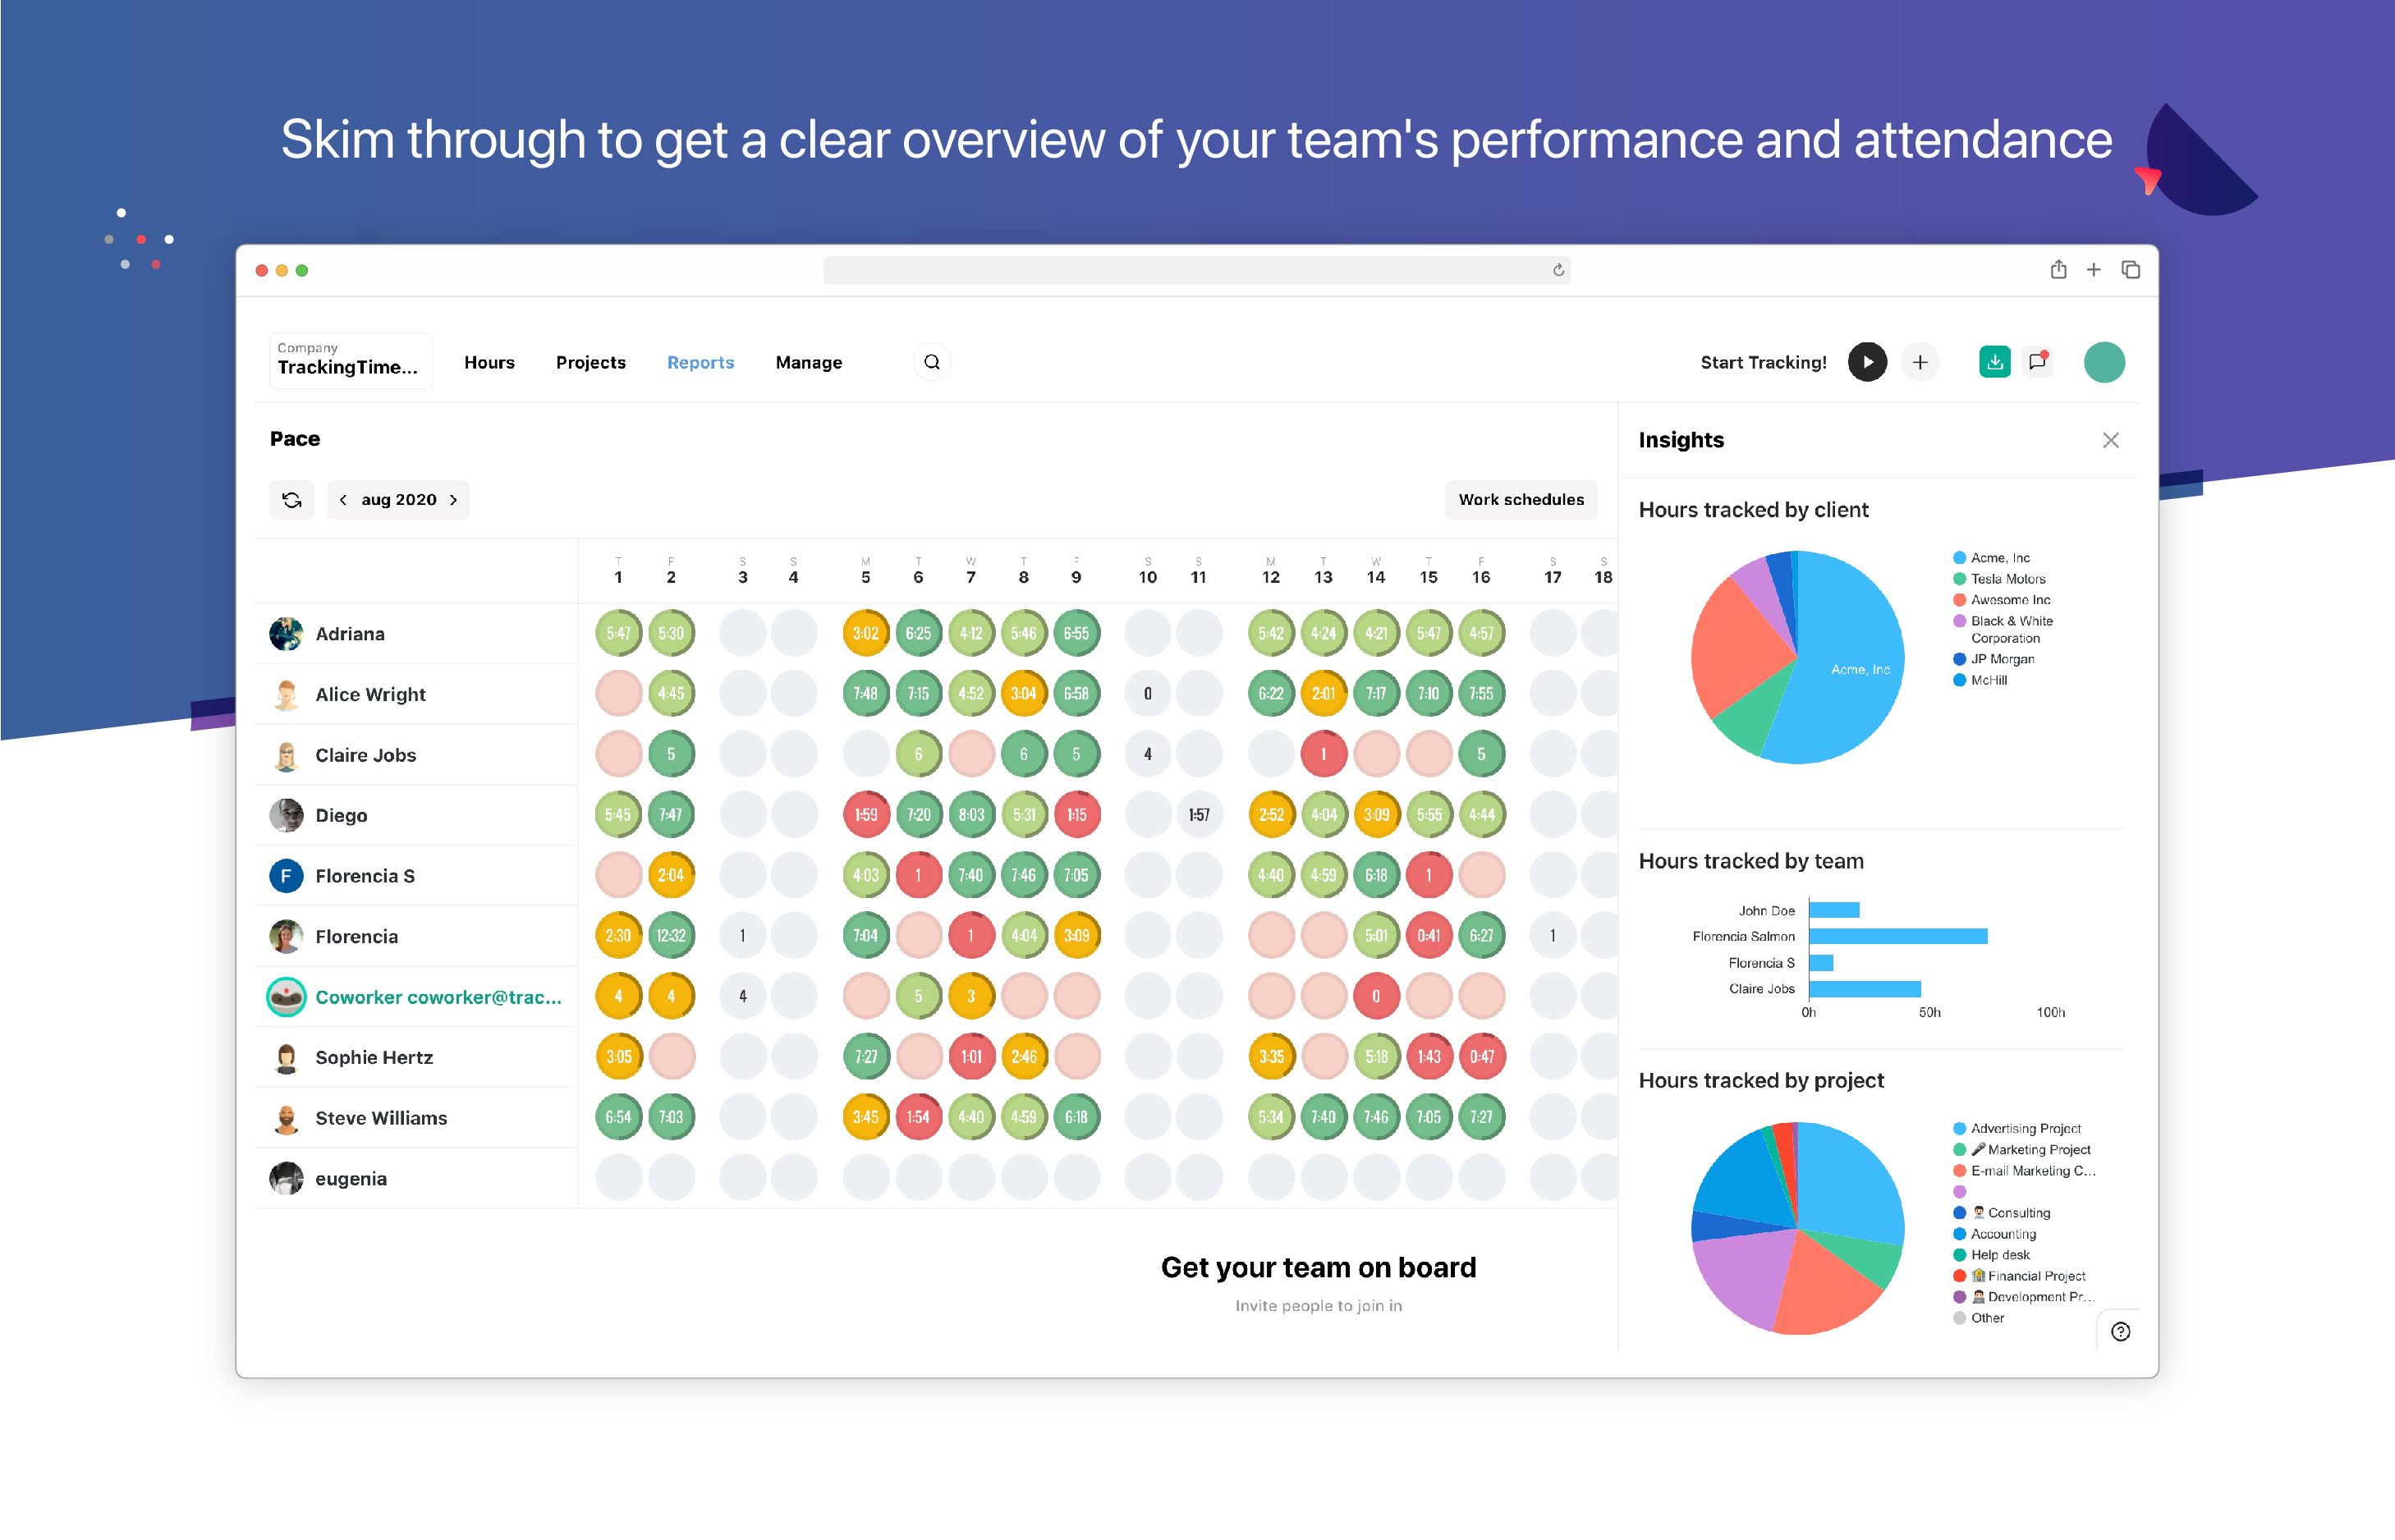 Skim through to get a clear overview of your team's performance and attendance.